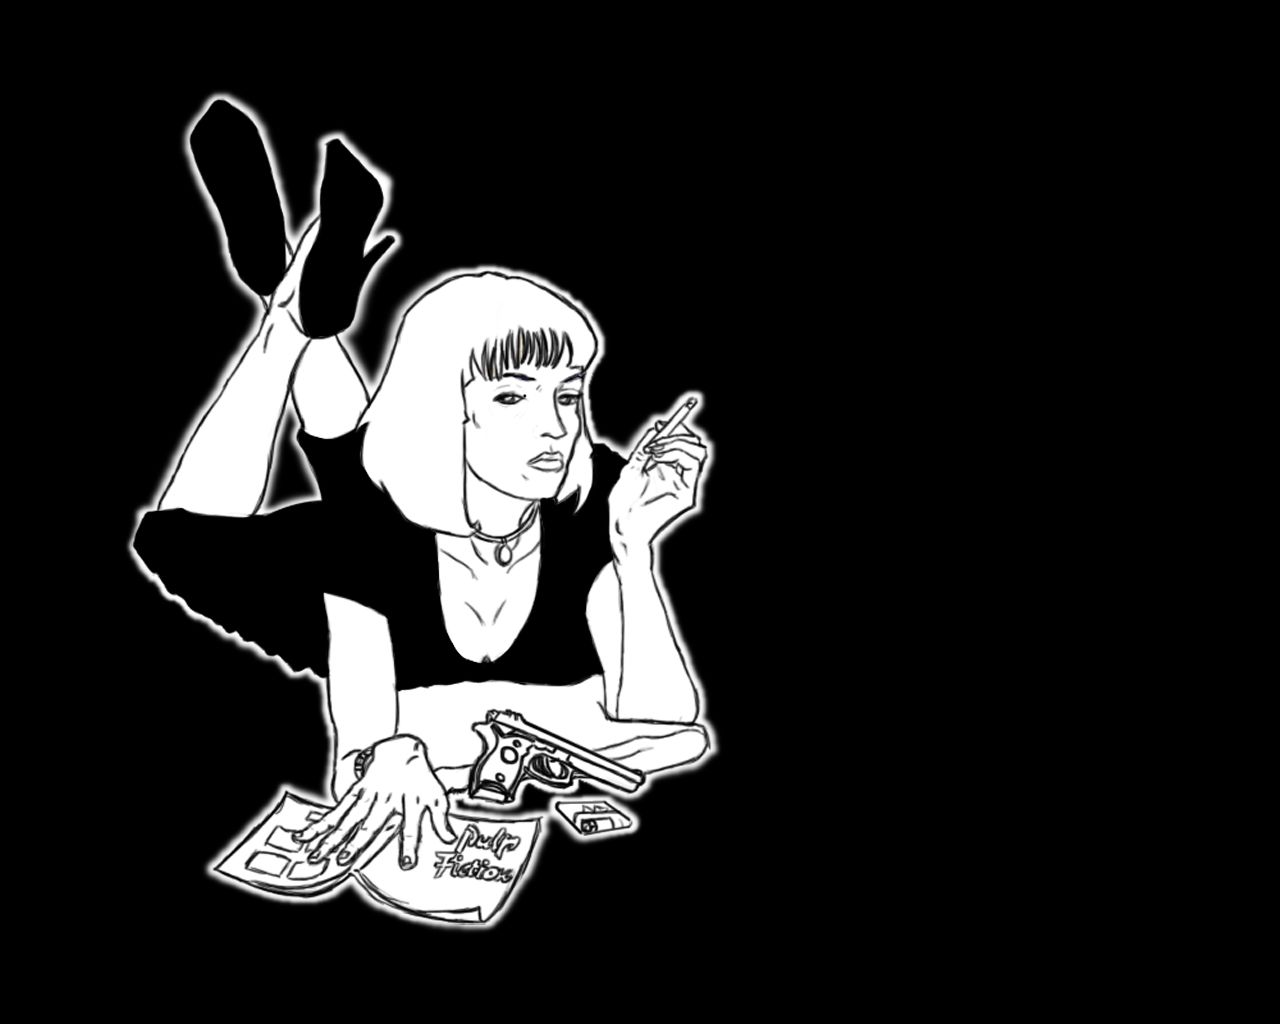 Wallpaper: Pulp Fiction Black and White | Pandakick to THE FACE